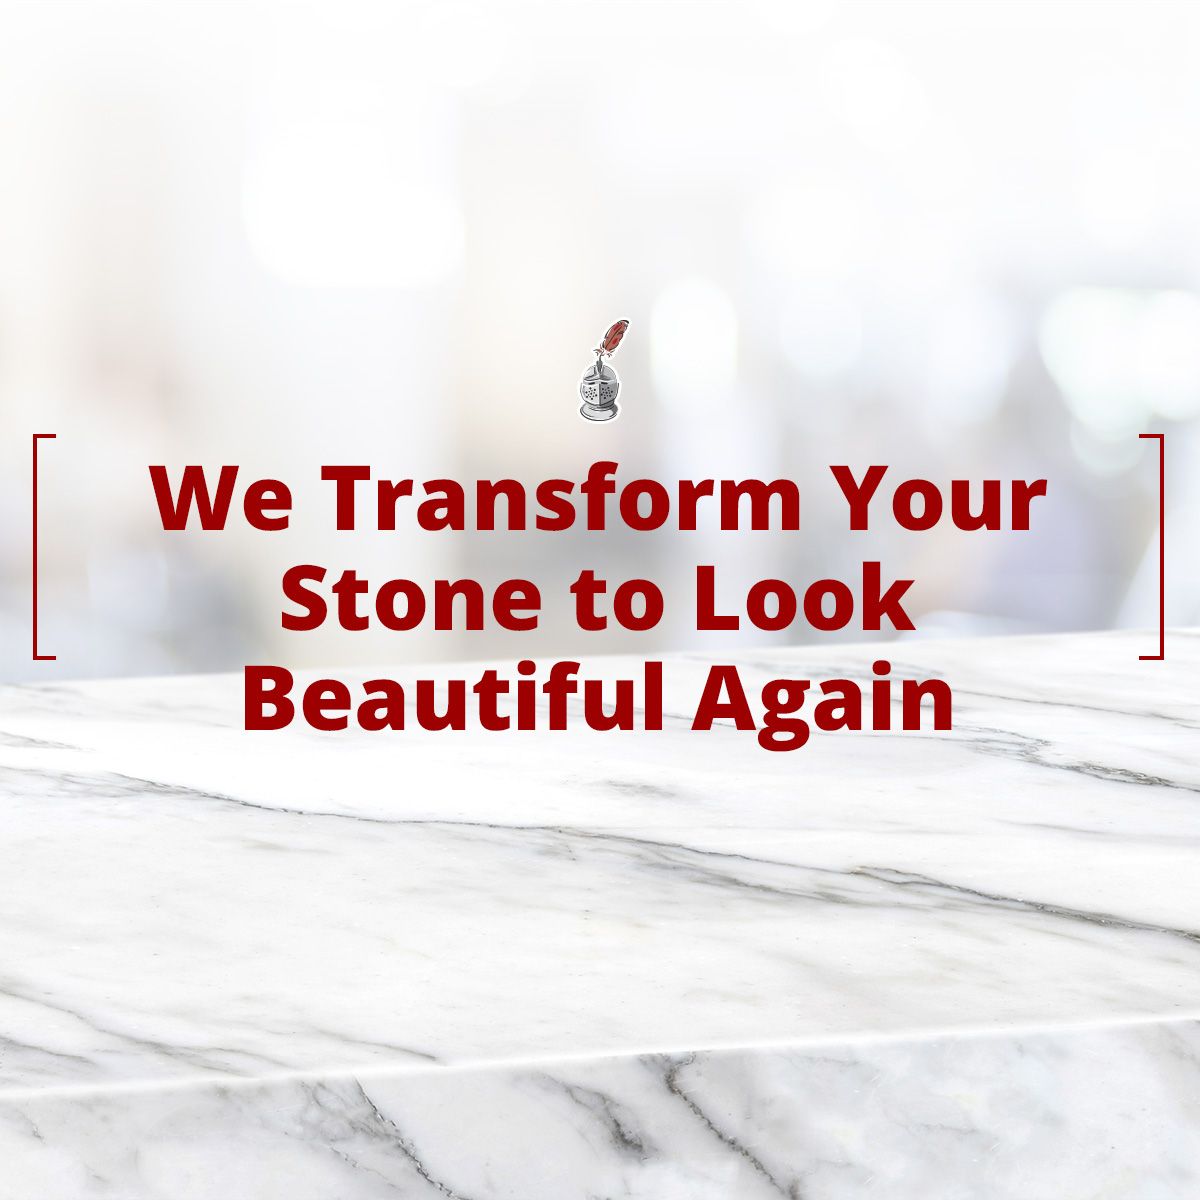 We Transform Your Stone to Look Beautiful Again